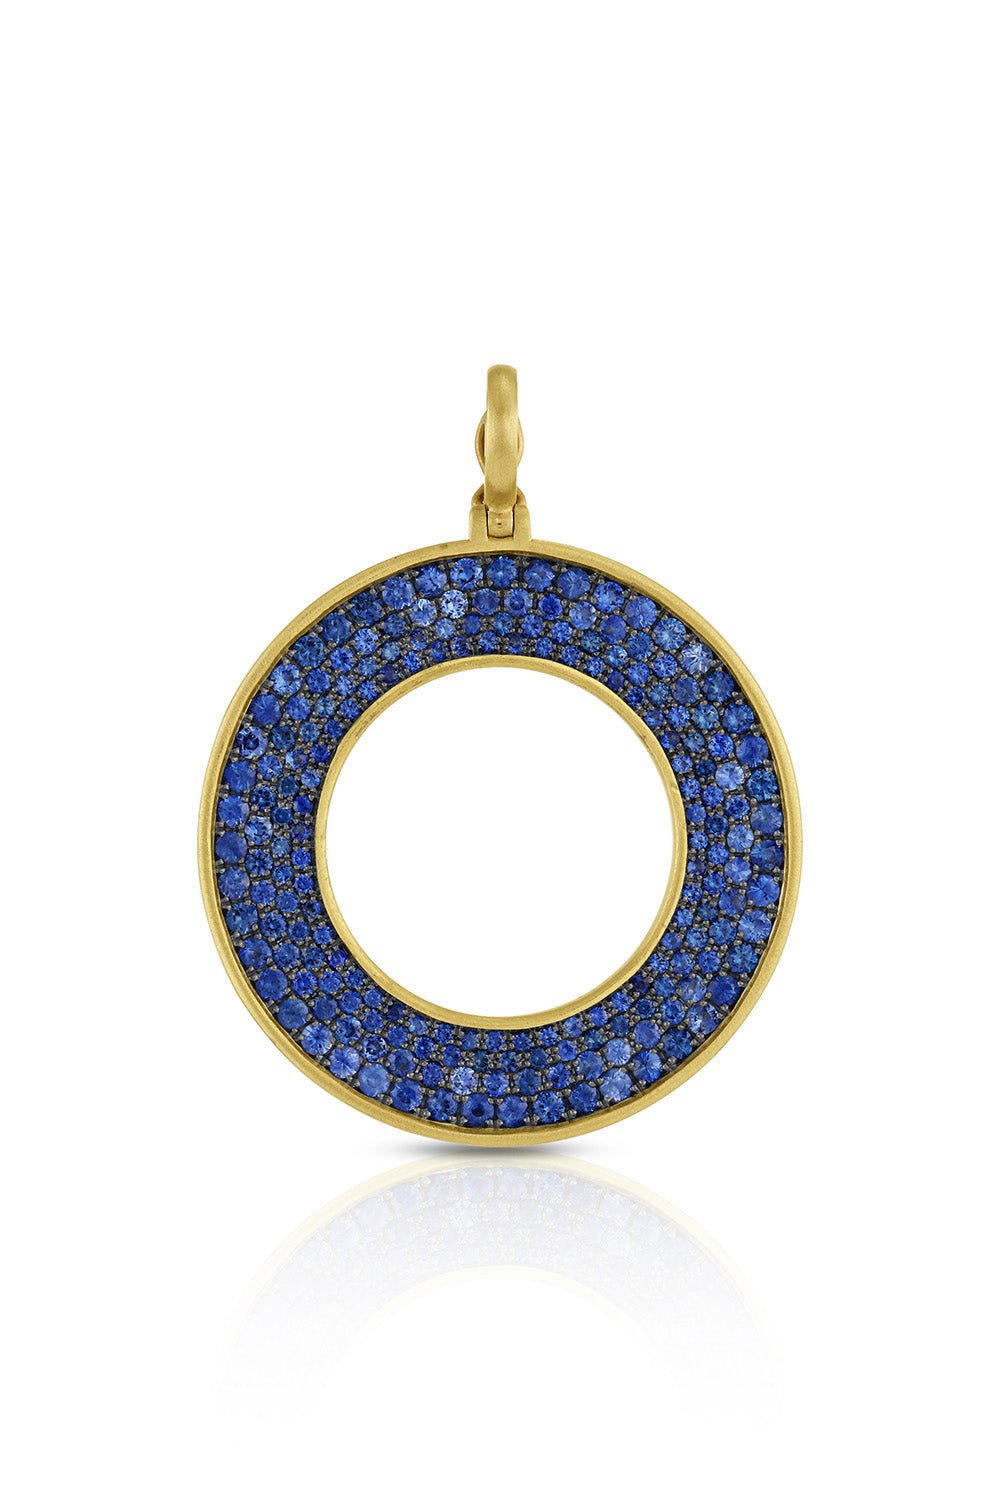 LEIGH MAXWELL-Large Amani Pavé Sapphire Pendant-YELLOW GOLD